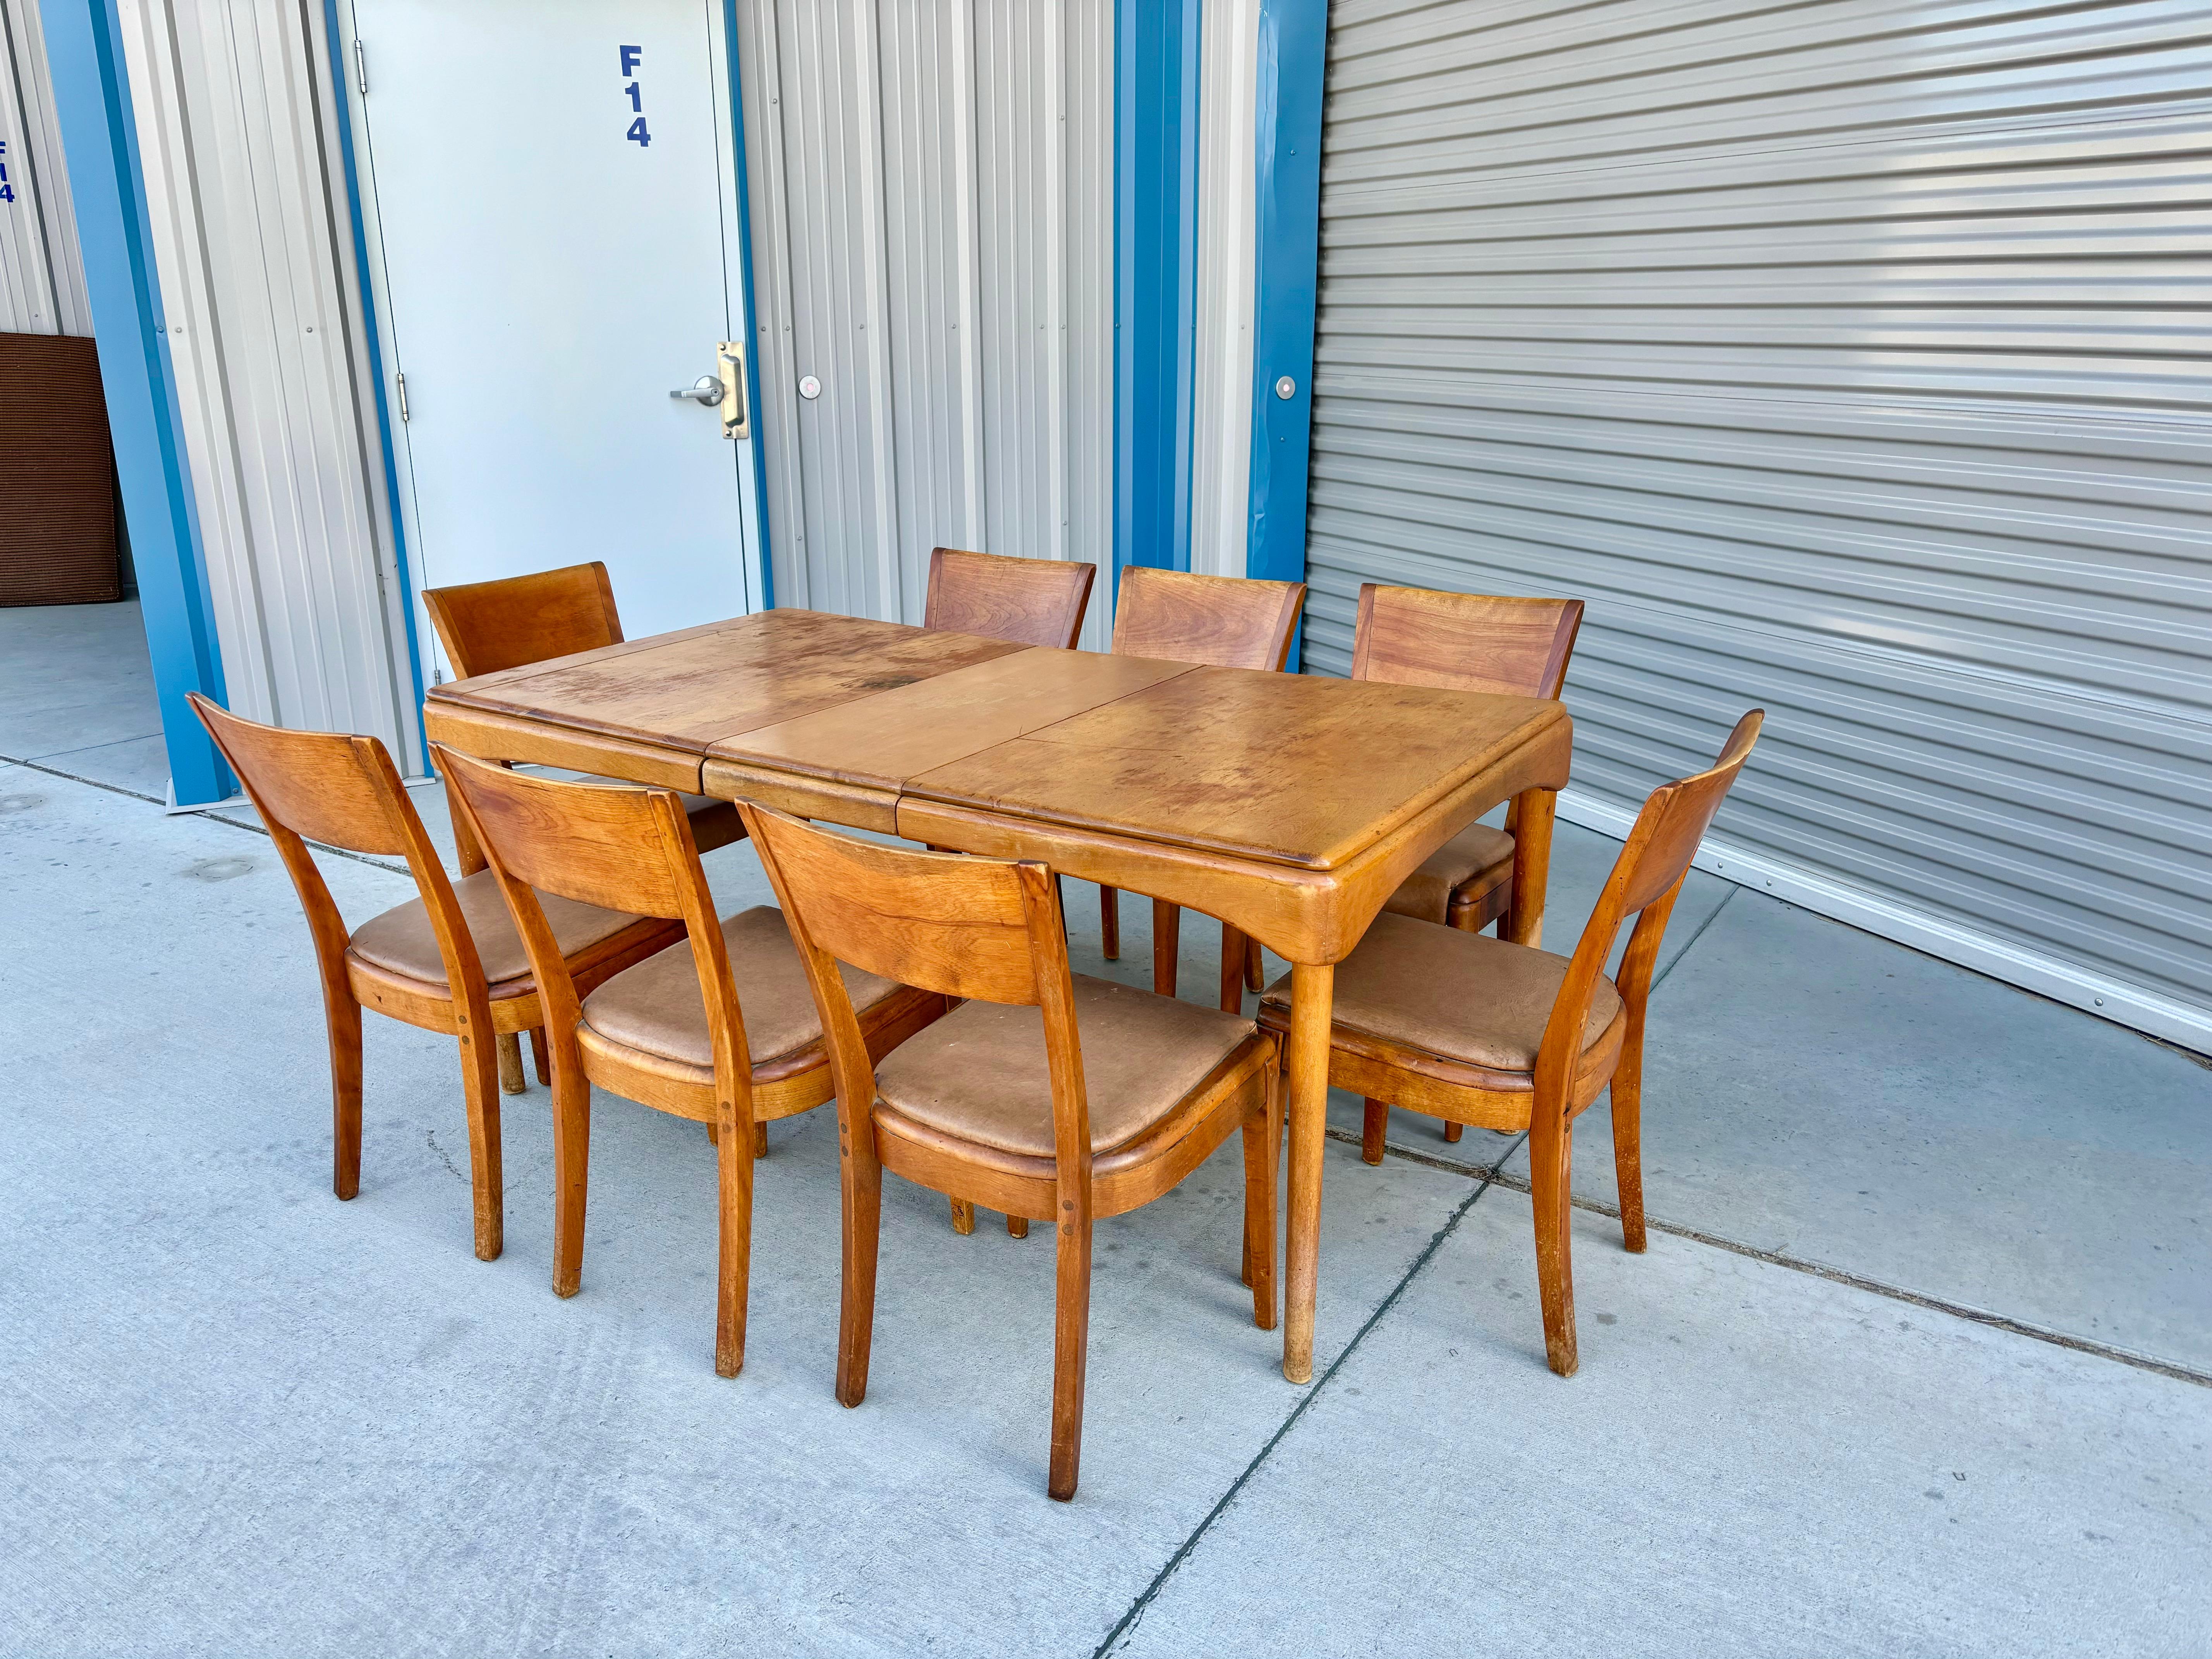 This mid-century maple dining room set was designed and manufactured by Heywood Wakefield in the United States circa the 1960s. This unique set features eight dining chairs made in sturdy maple frames and a captivating brown vinyl upholstery that